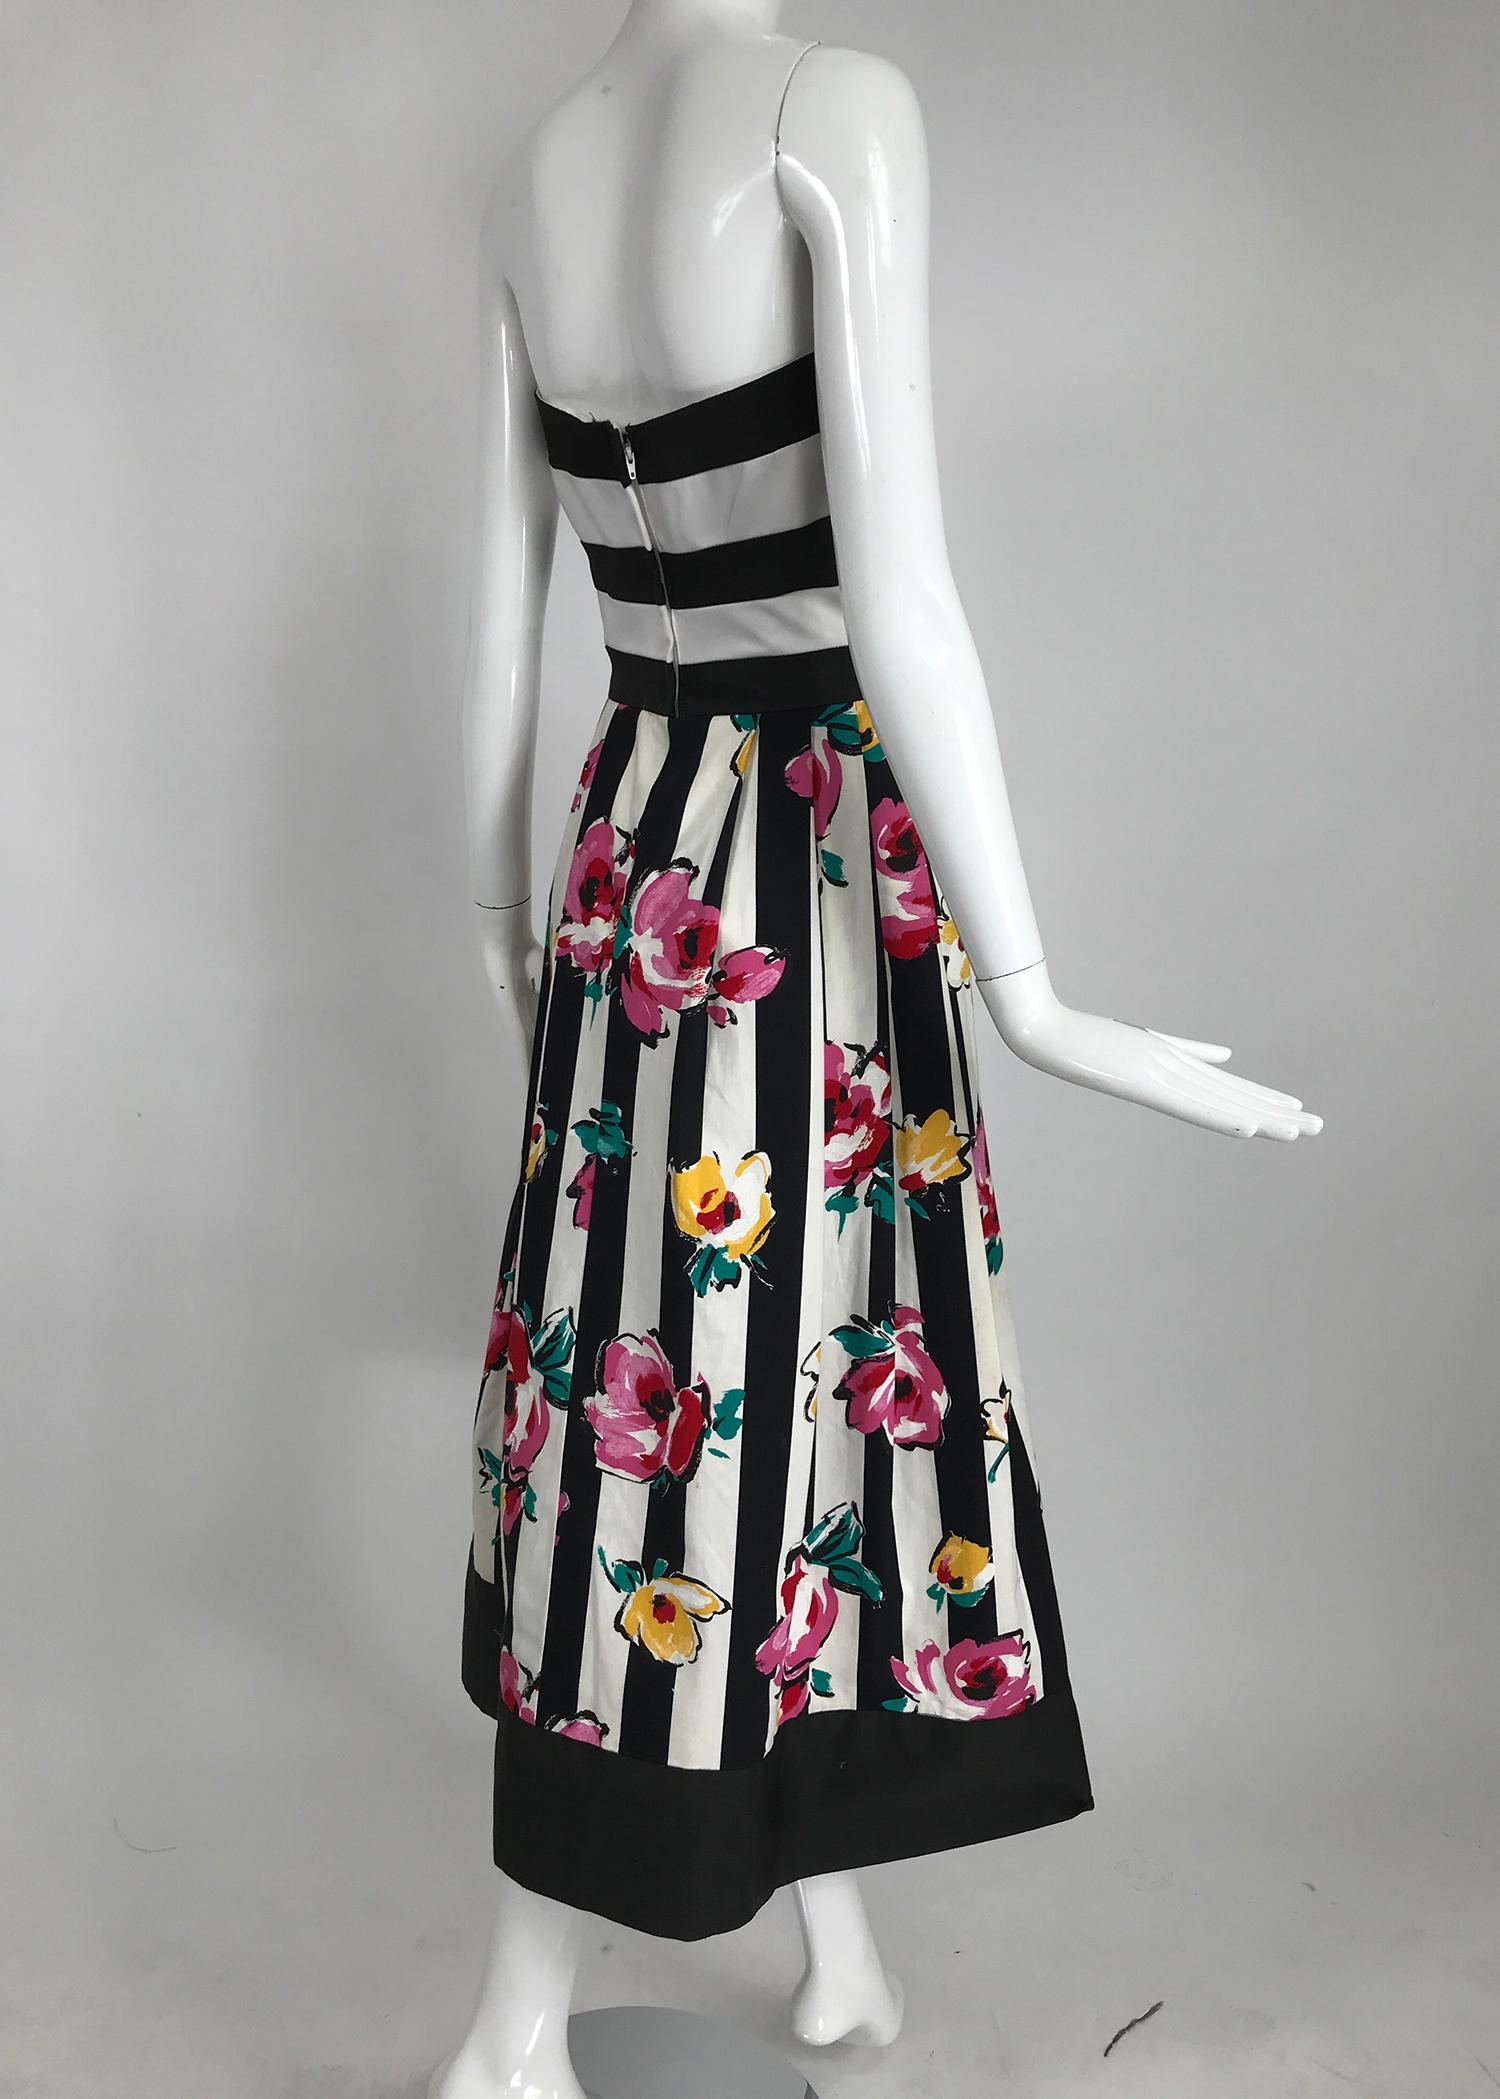 Victor Costa Strapless Black and White Stripe Floral Fit and Flare Dress In Good Condition For Sale In West Palm Beach, FL